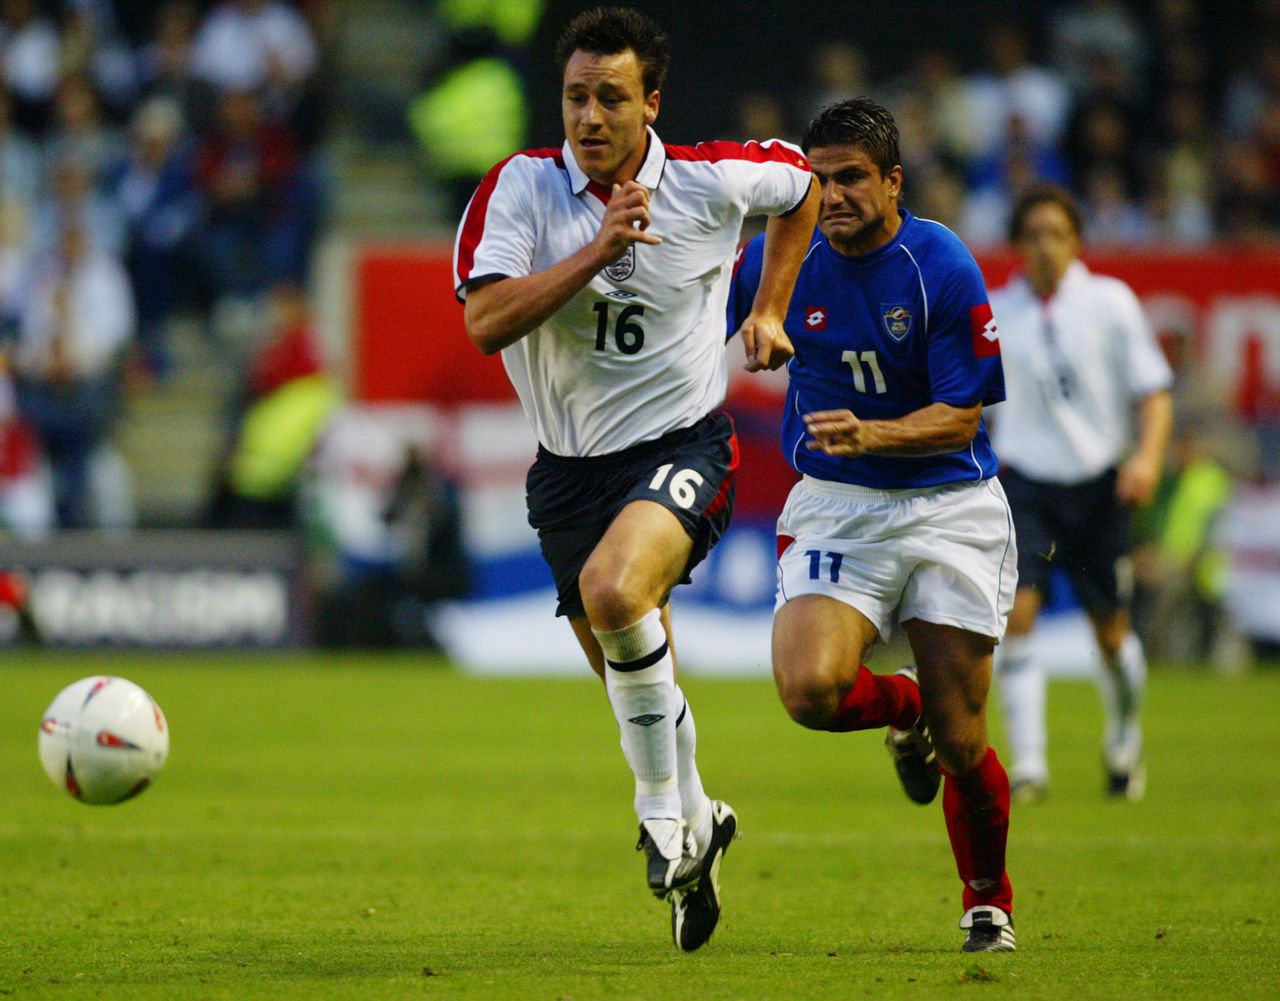 Terry's impressive form was recognized in 2003 when he was handed his England debut as a substitute in a 2-1 victory over Serbia and Montenegro.